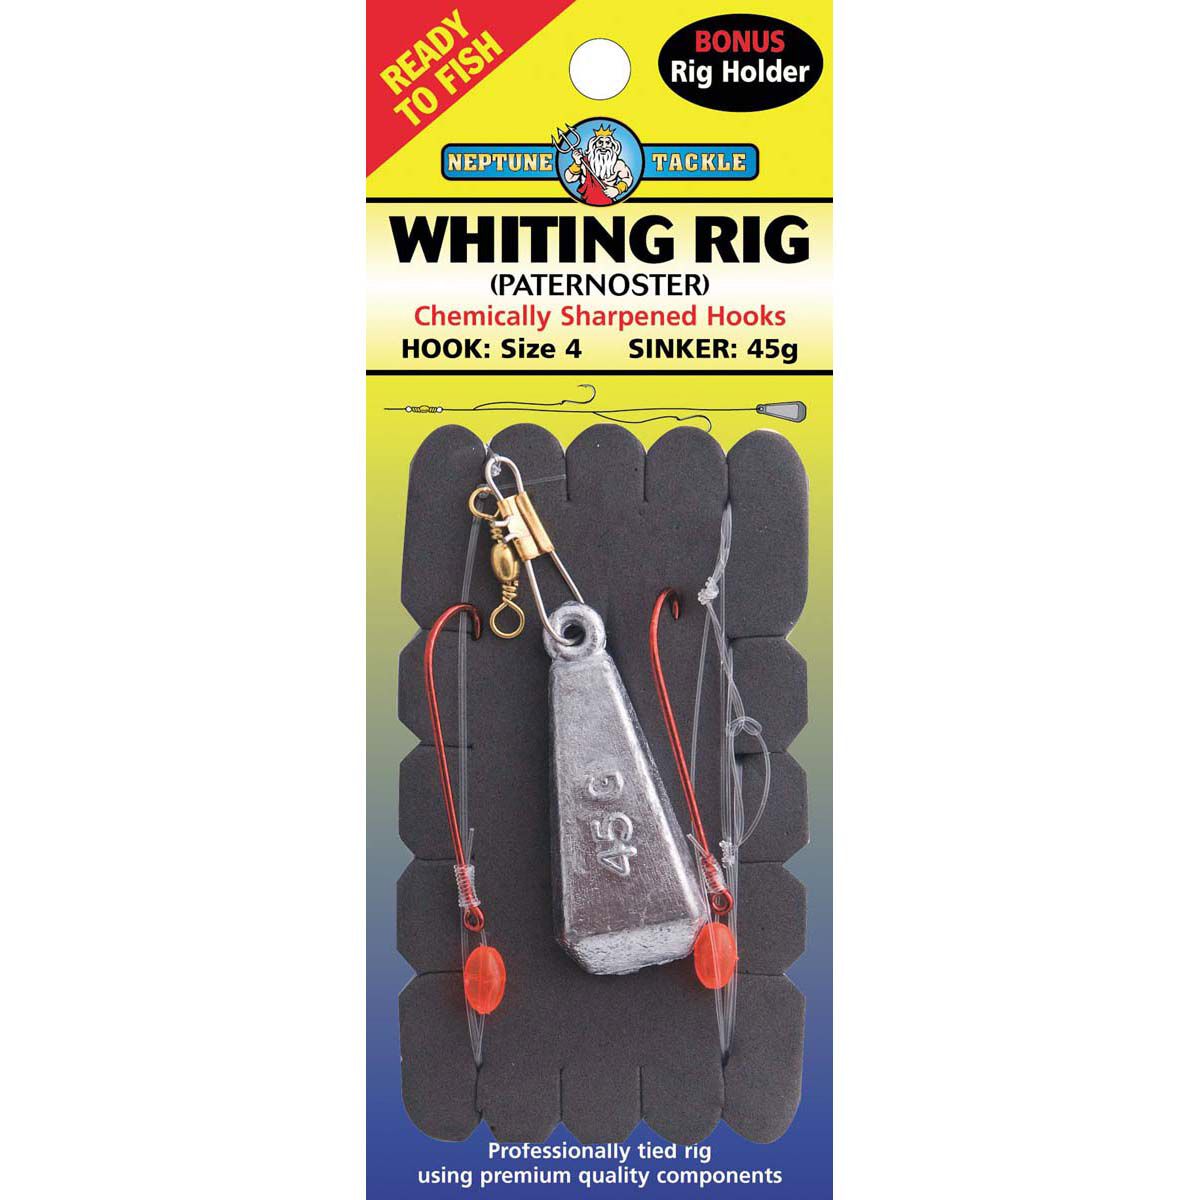 Shark fishing bite trace 'Pro Series' 360 rig AFW Wire. DIY hook